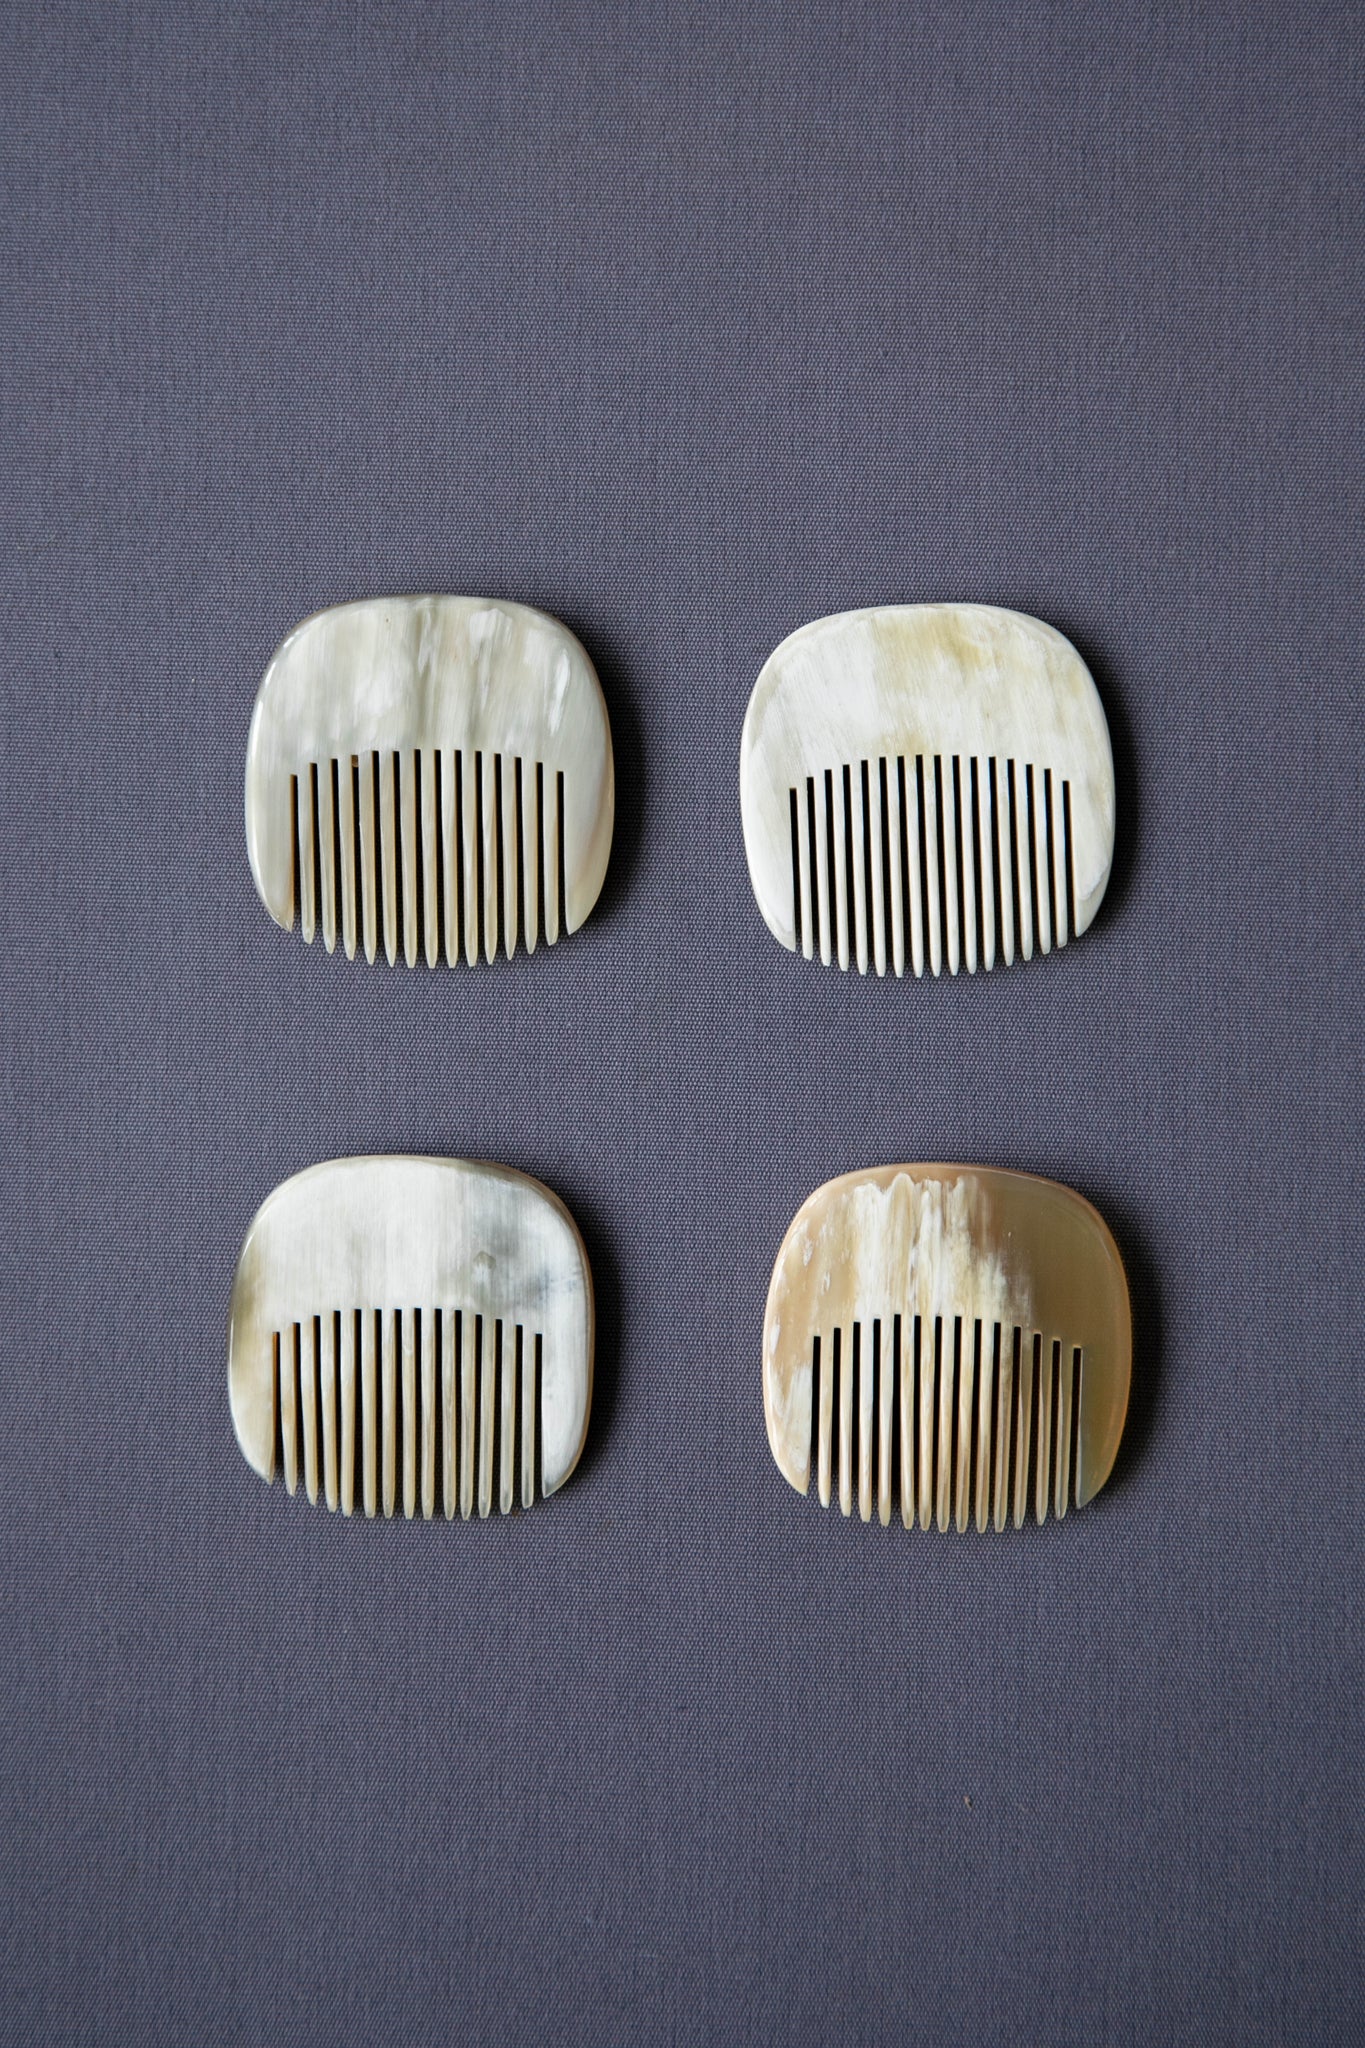 Horn Oval Comb in Cream